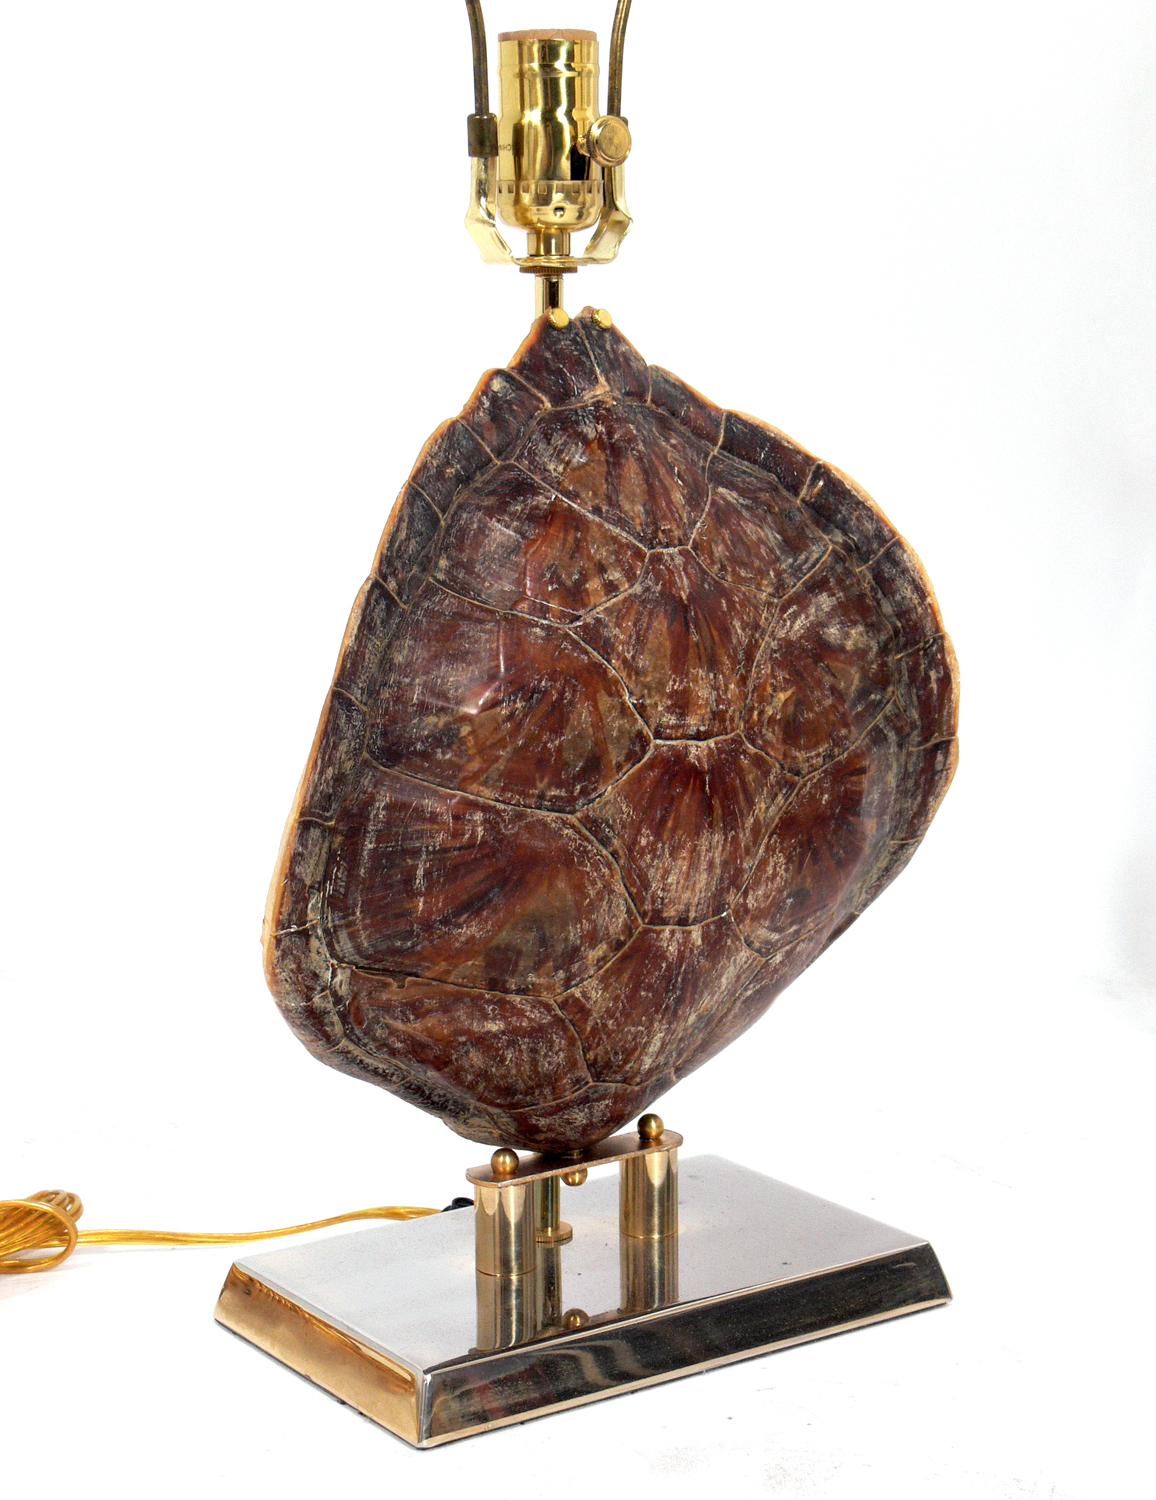 Selection of natural specimen mounts, French, circa 1950s. From left to right, as seen in the first photo, they are:
1) Tortoise shell and brass lamp, French, circa 1950s. Rewired. It measures 23